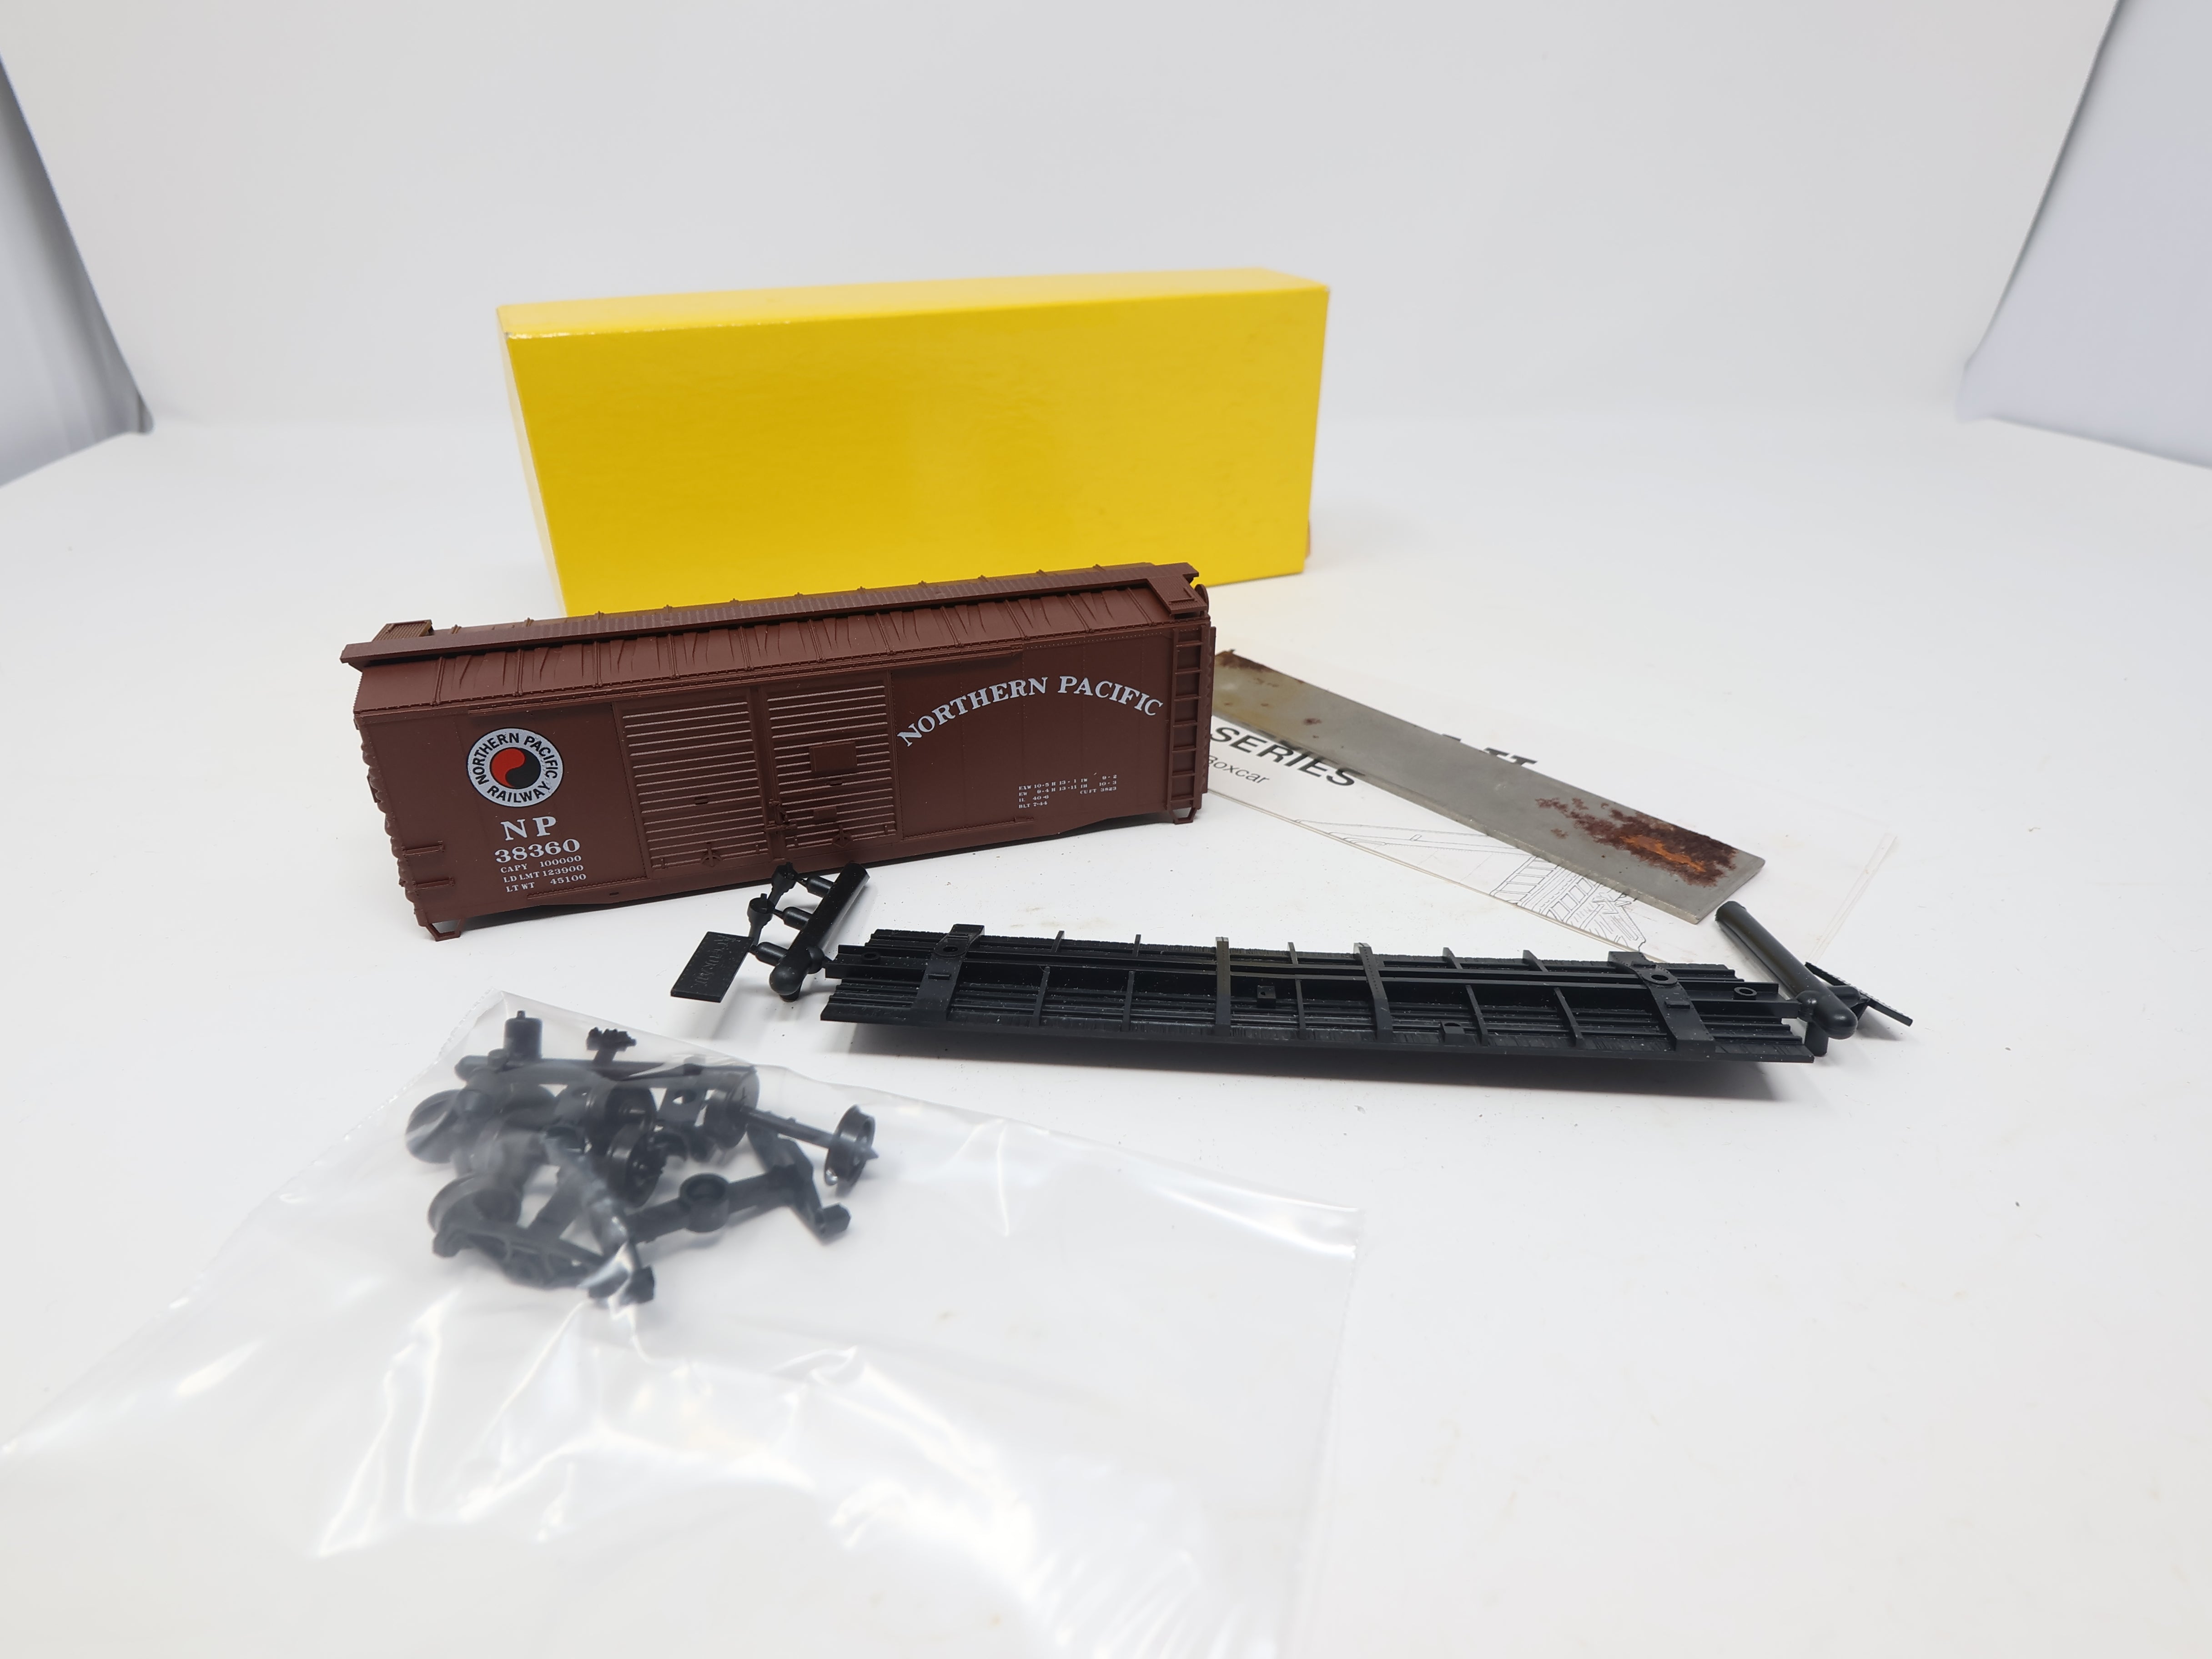 USED Accurail HO Scale, 40' DD Box Car, Northern Pacific NP #38360 (KIT)